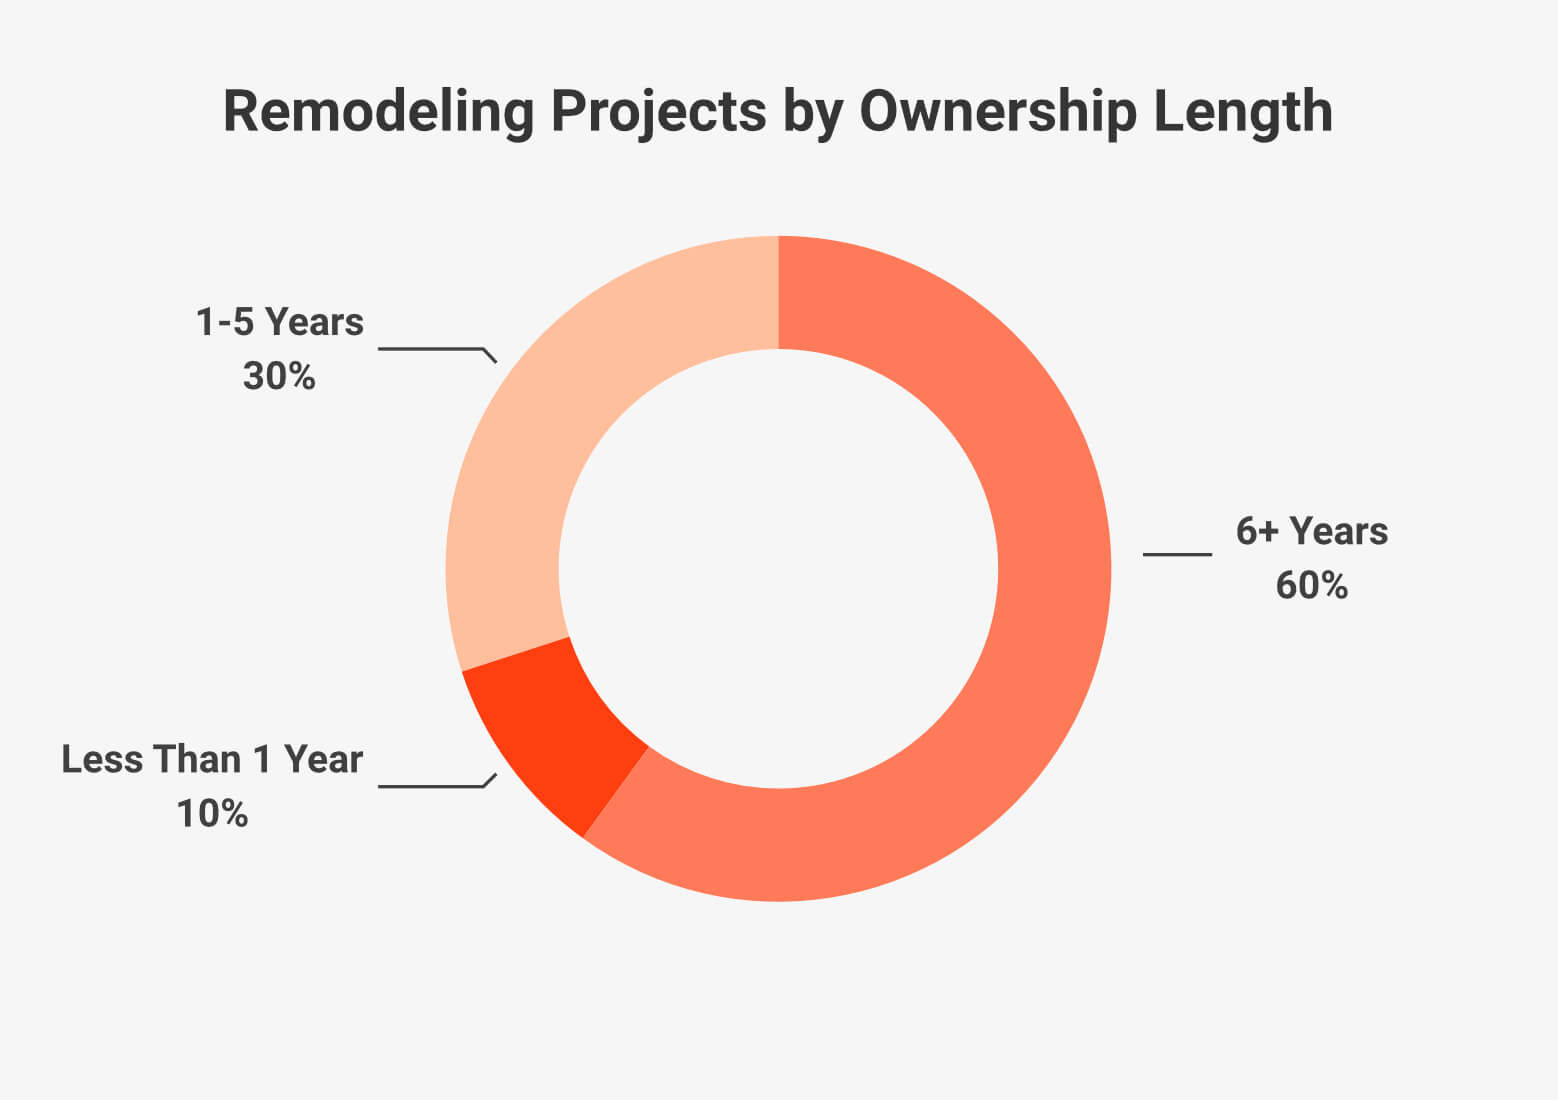 Remodeling Projects by Ownership Length